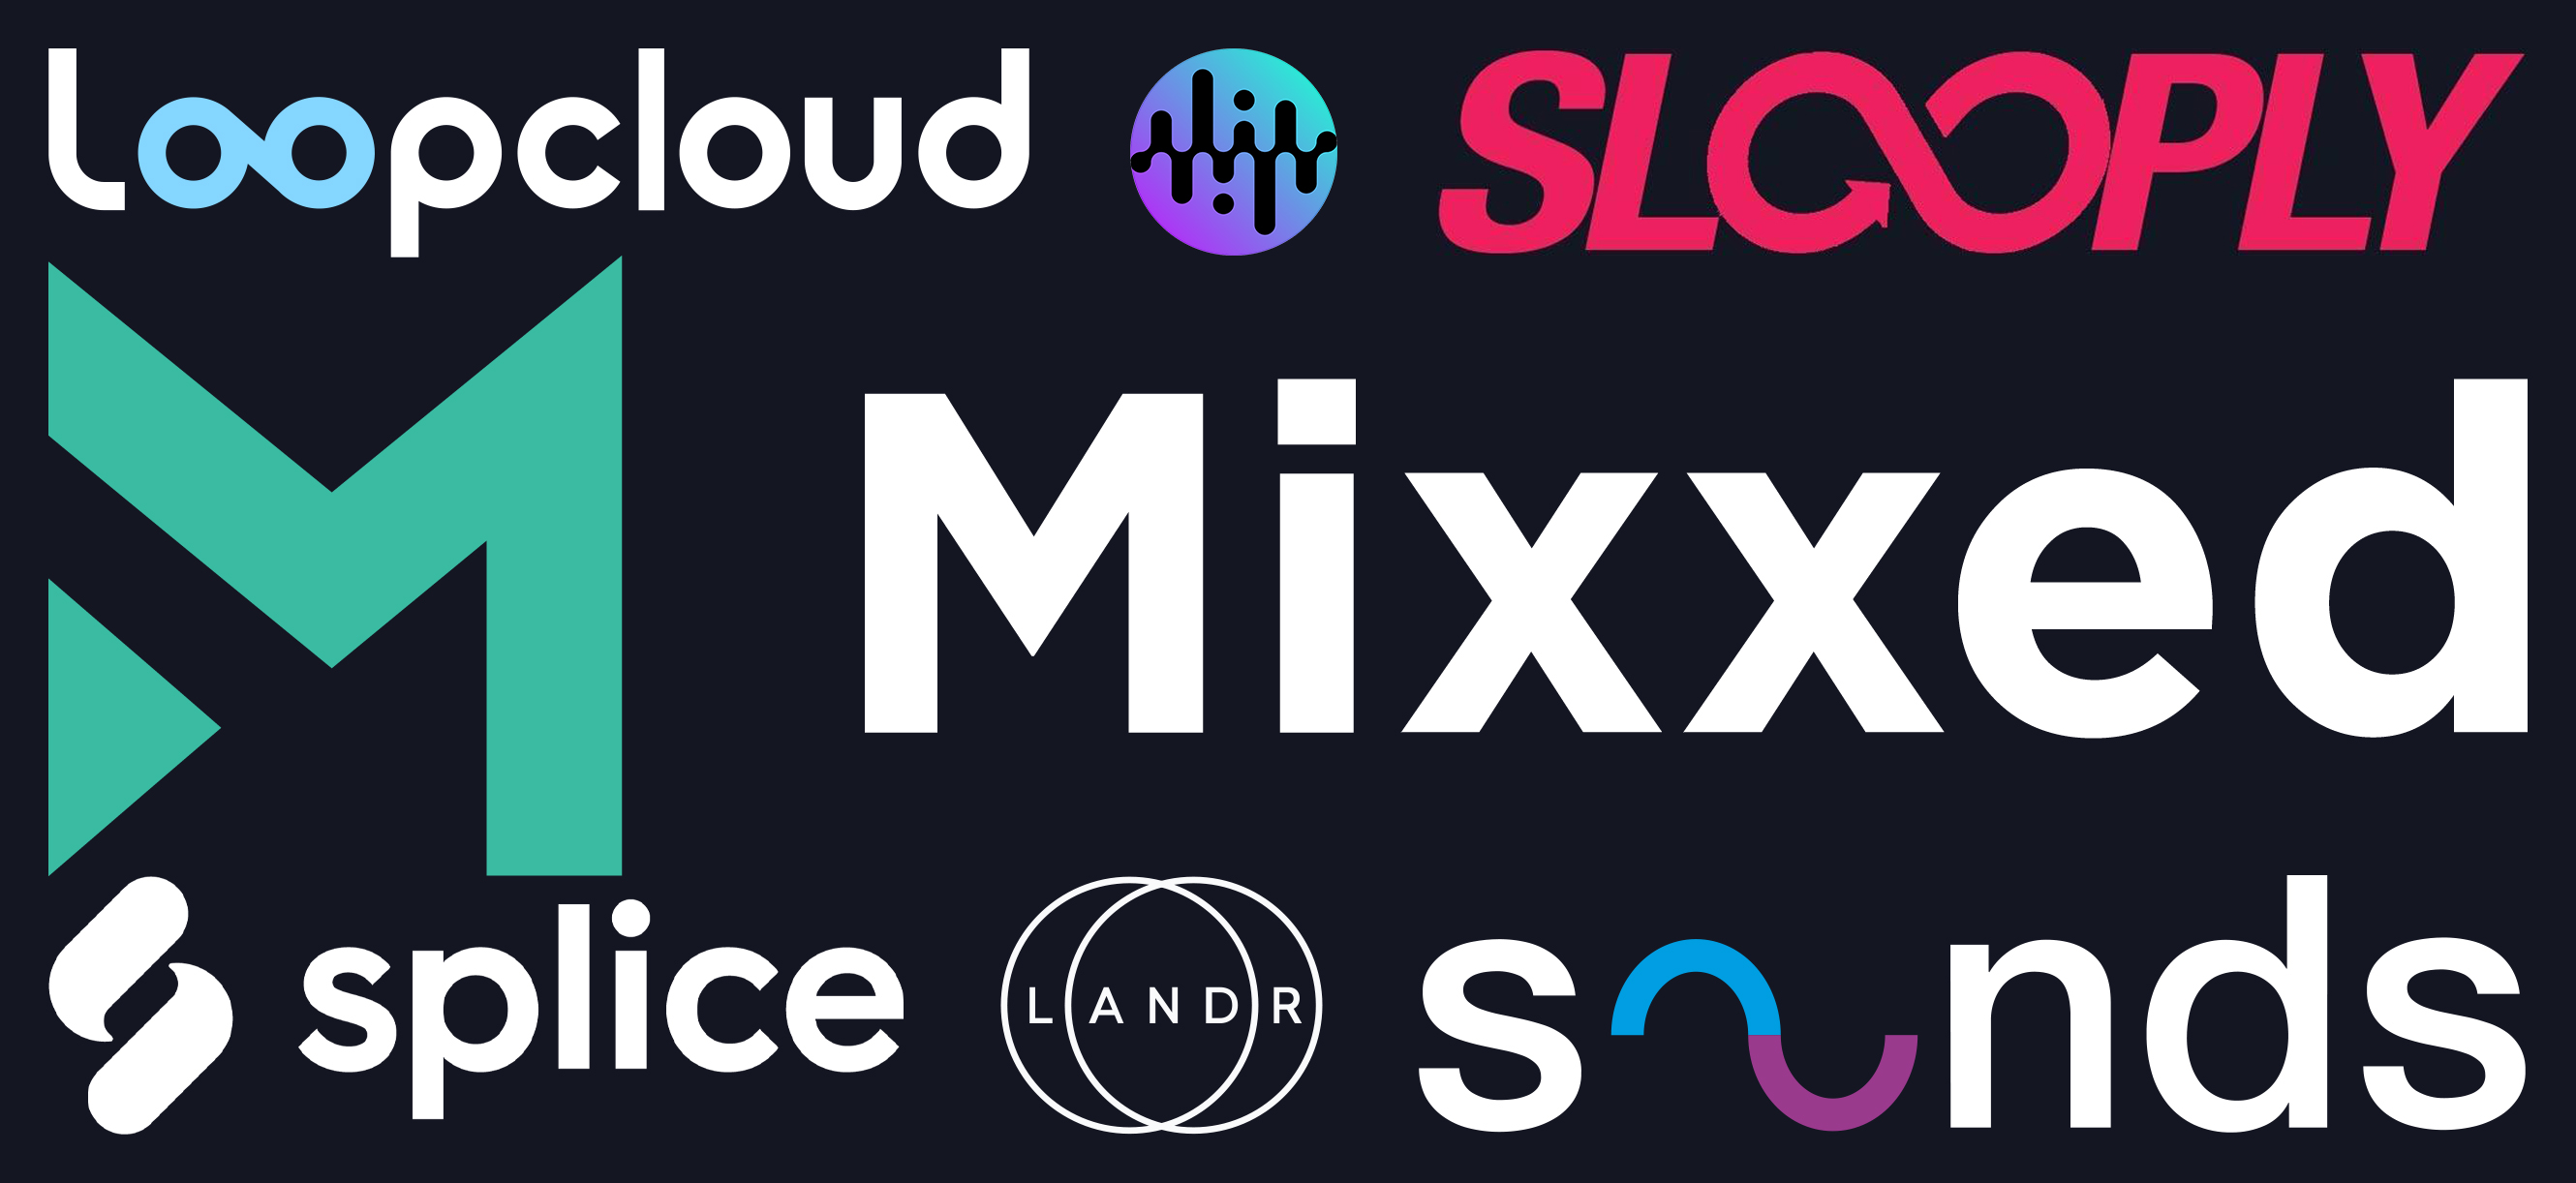 How does Mixxed compare to Splice, Loopcloud, Sounds.com, Noiiz, Slooply and LANDR?